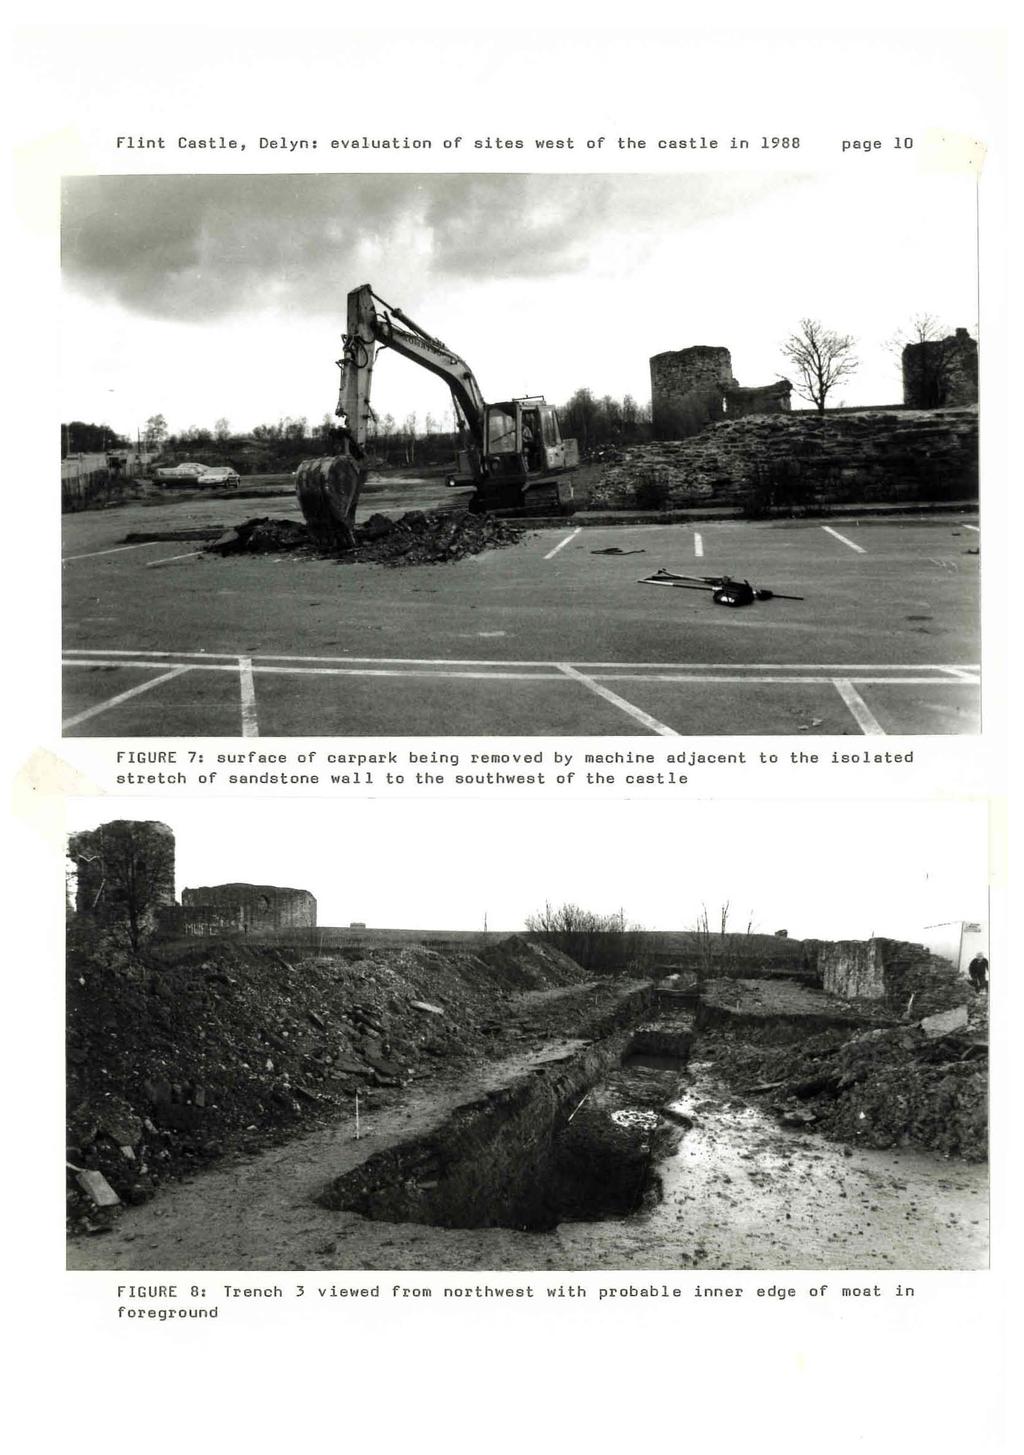 Flint Castle, Delyn: evaluation of sites west of the castle in 1988 page 10 FGURE 7: surface of carpark being removed by machine adjacent to the